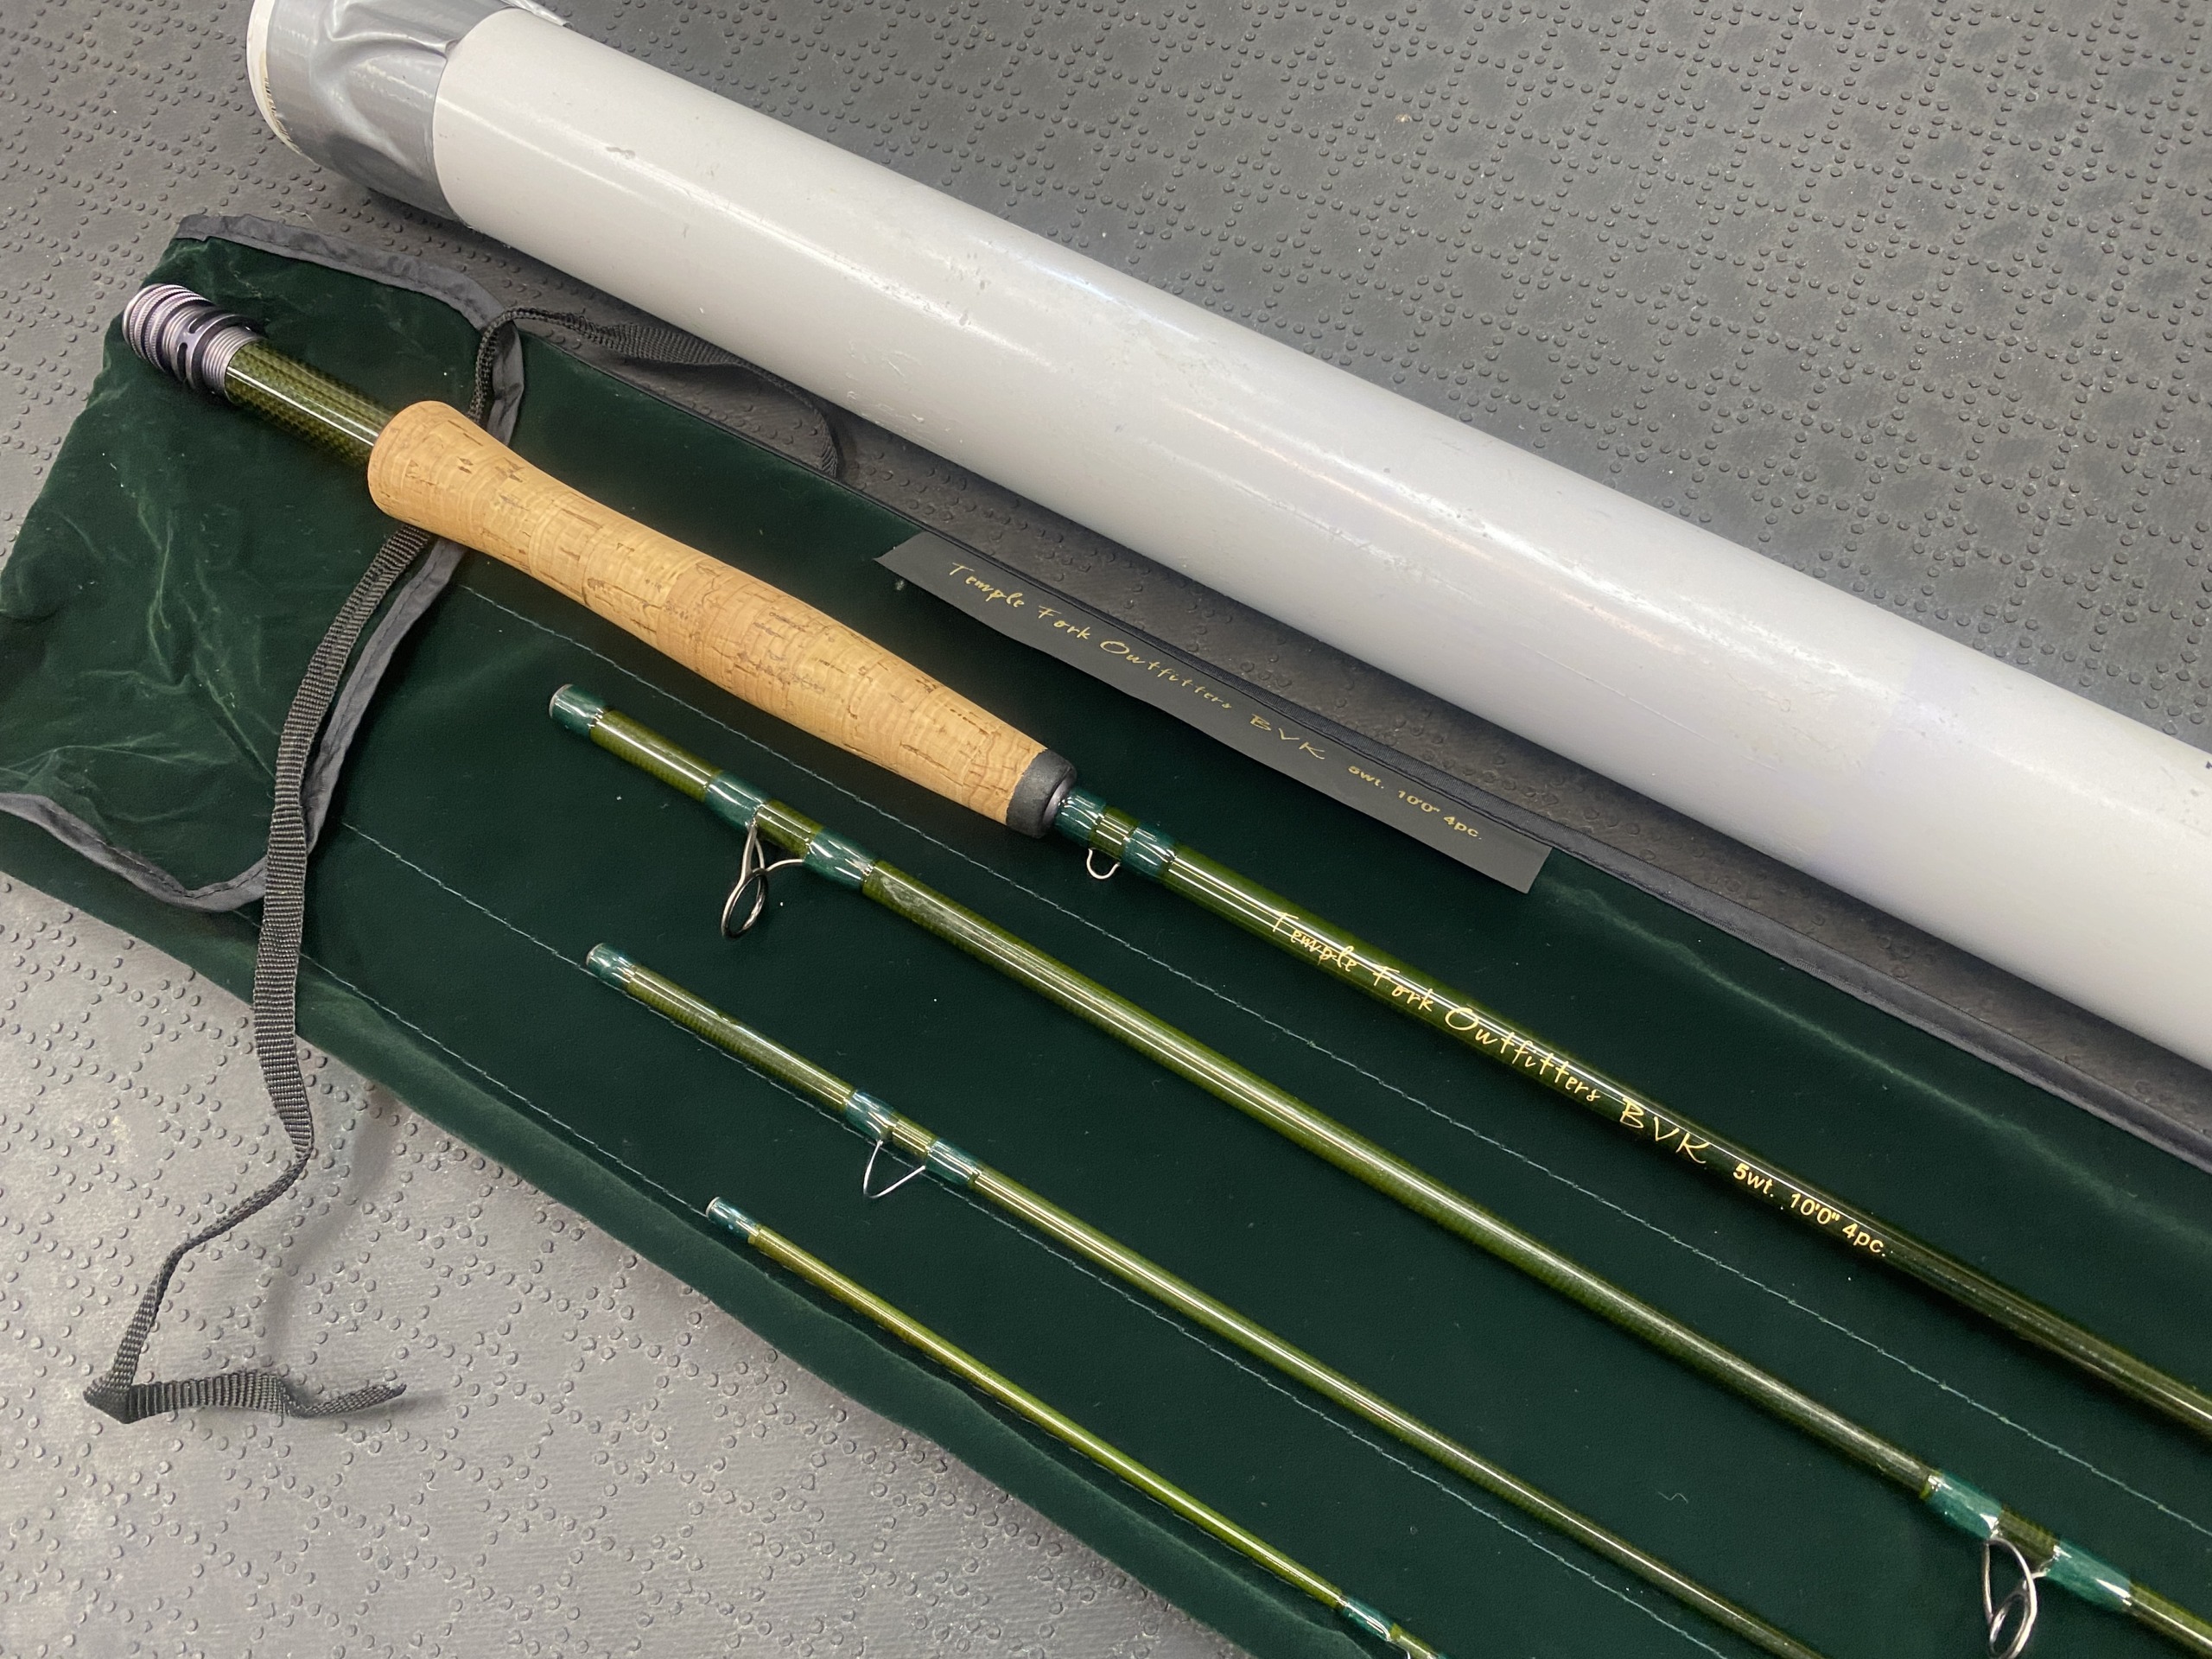 TFO Professional 3 Series Fly Rods  Temple Fork Outfitters – Temple Fork  Outfitters Canada